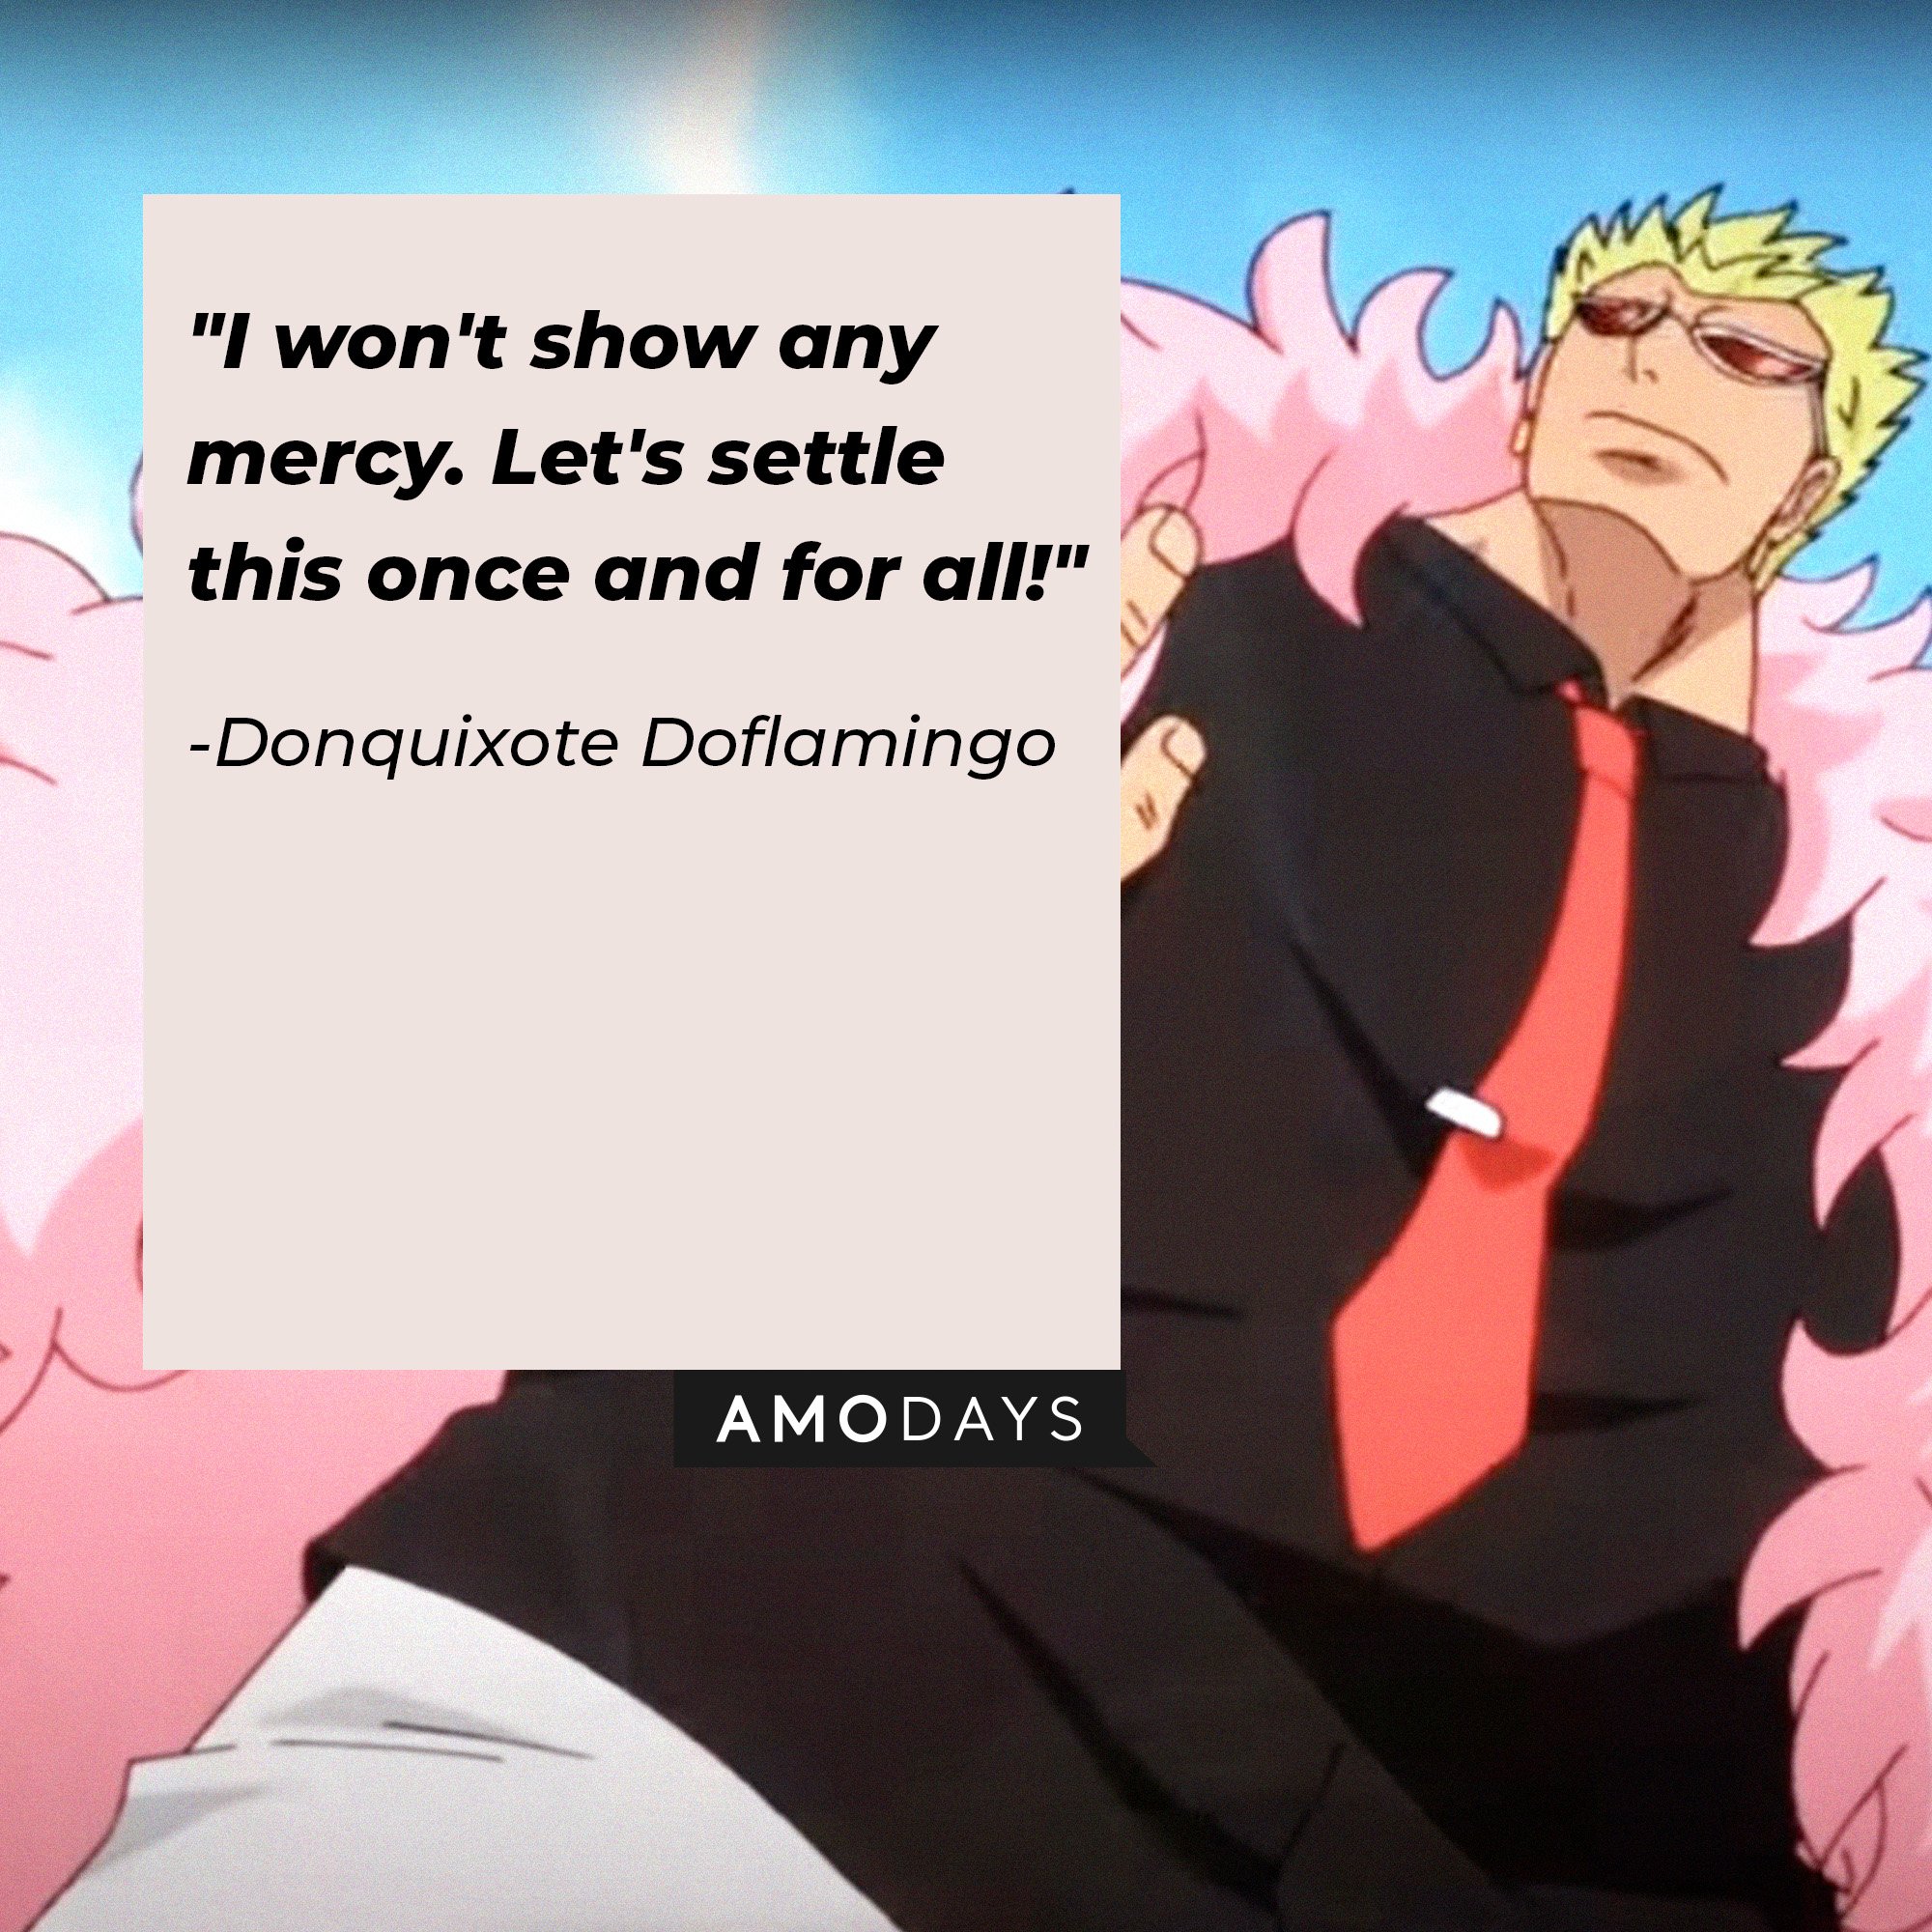 Donquixote Doflamingo’s quote: "I won't show any mercy. Let's settle this once and for all!" | Image: AmoDays